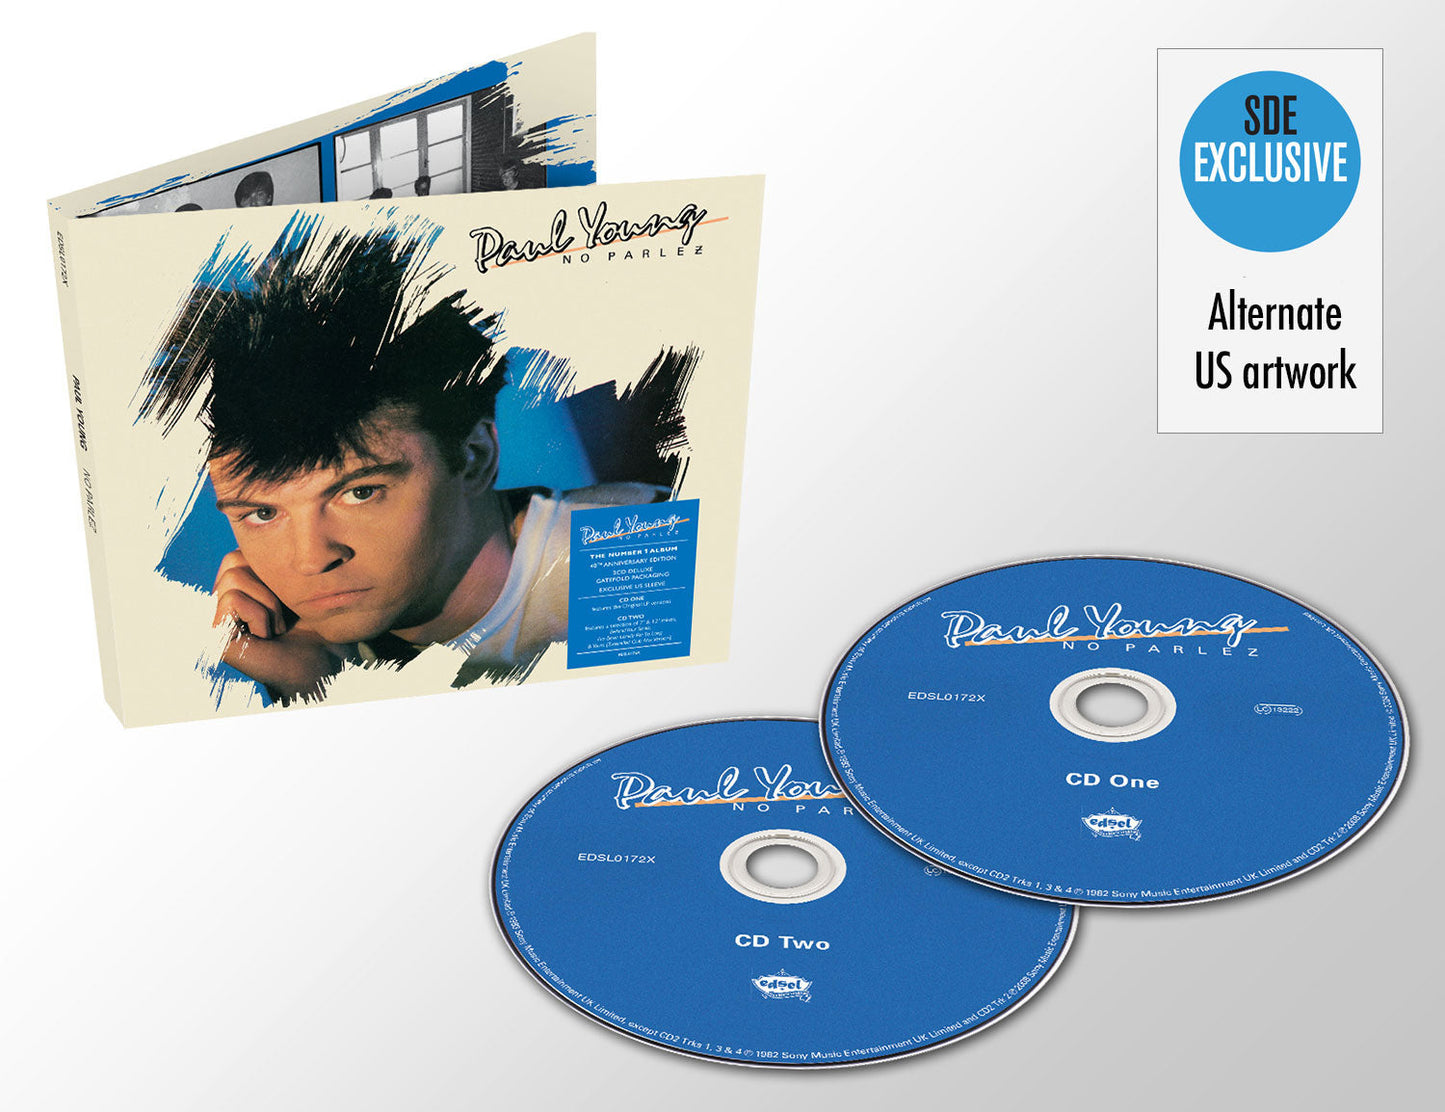 Paul Young COMPLETE Bundle: No Parlez Blu-ray Audio + 2CD + US-sleeved 2CD set